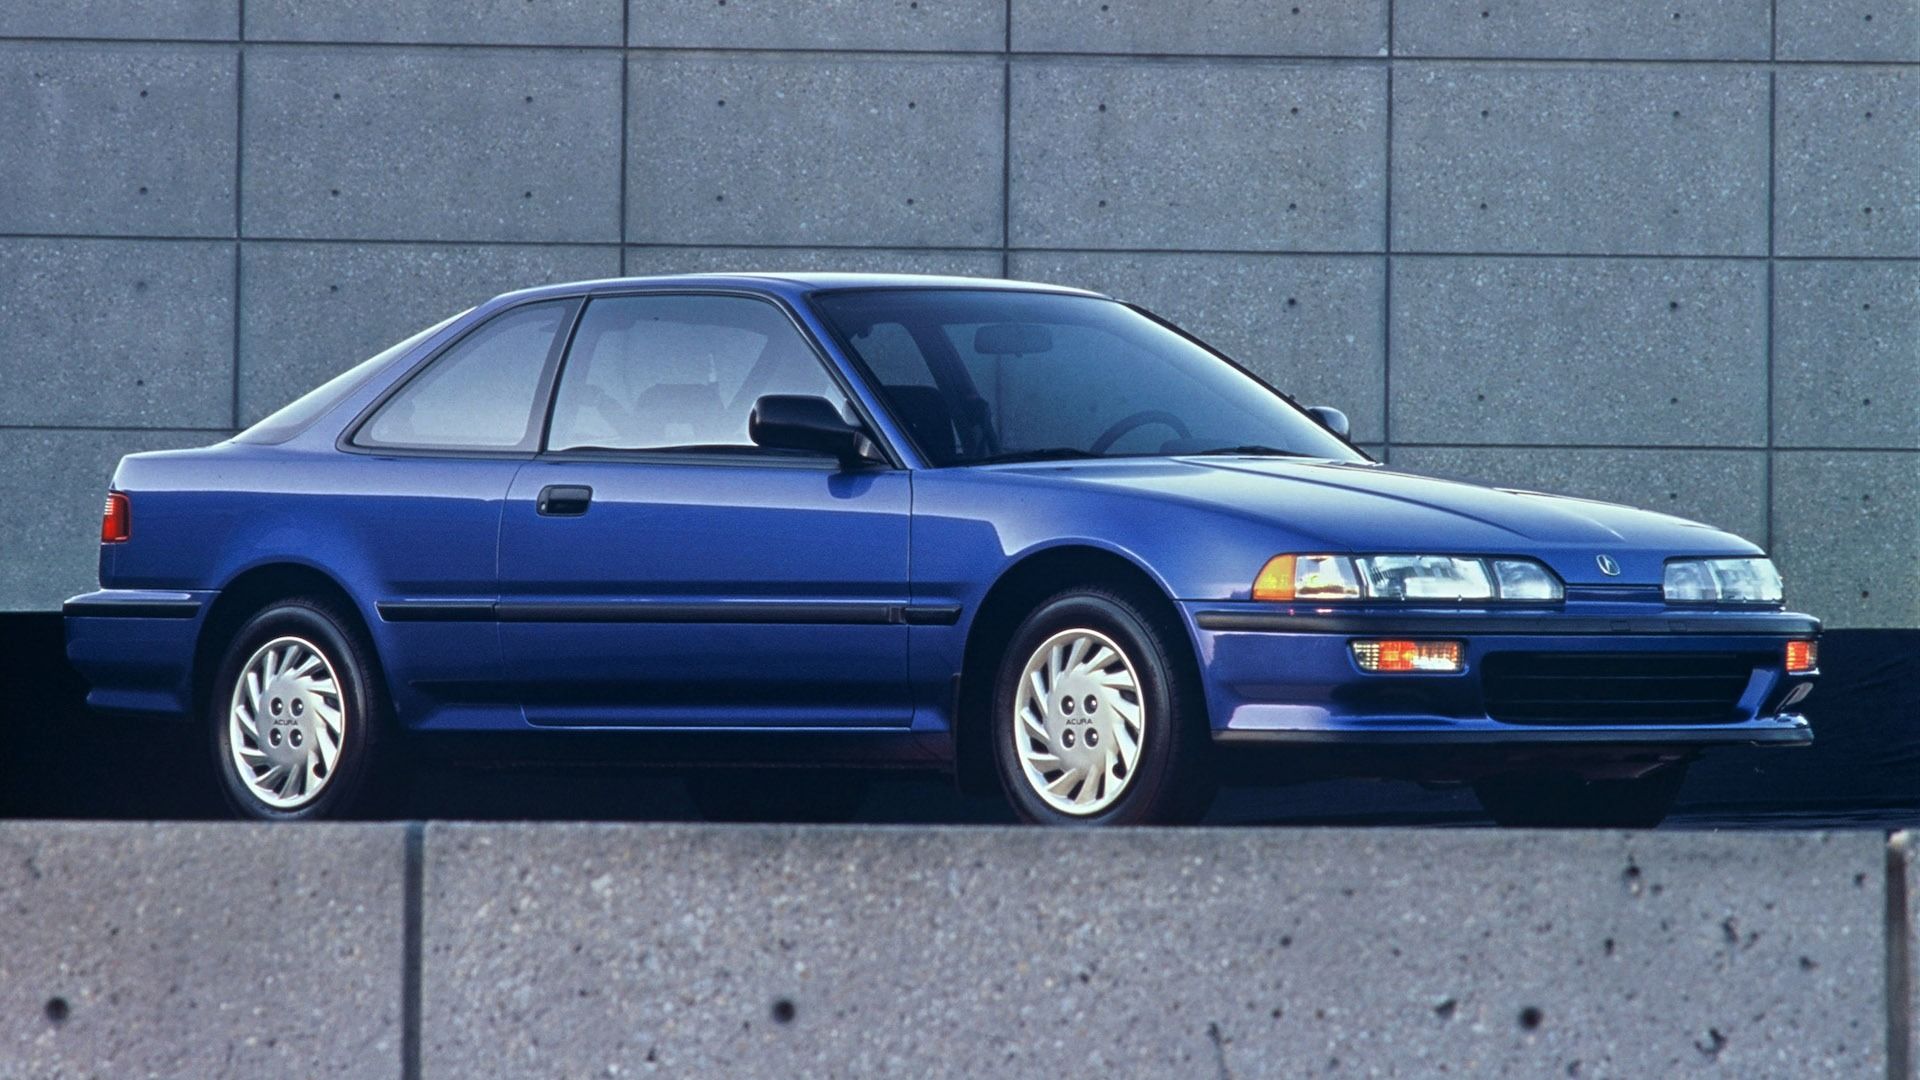 1992 Acura Integra: A luxurious sports car made for all ages.